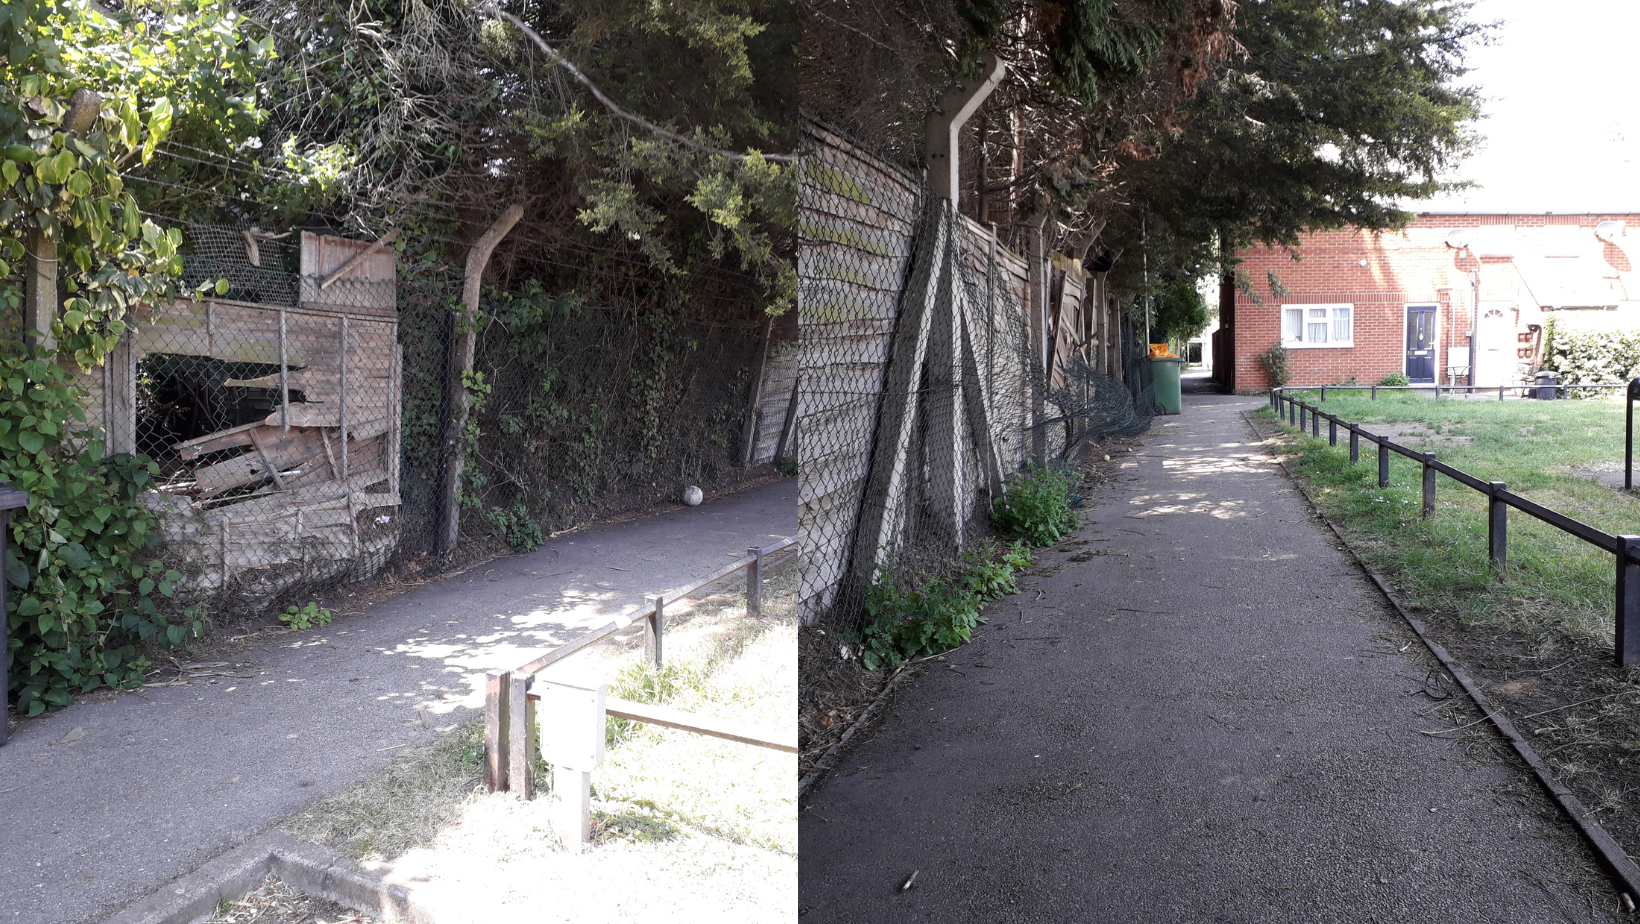 Before and after images of improvement work made in Thame after incidents of anti-social behaviour